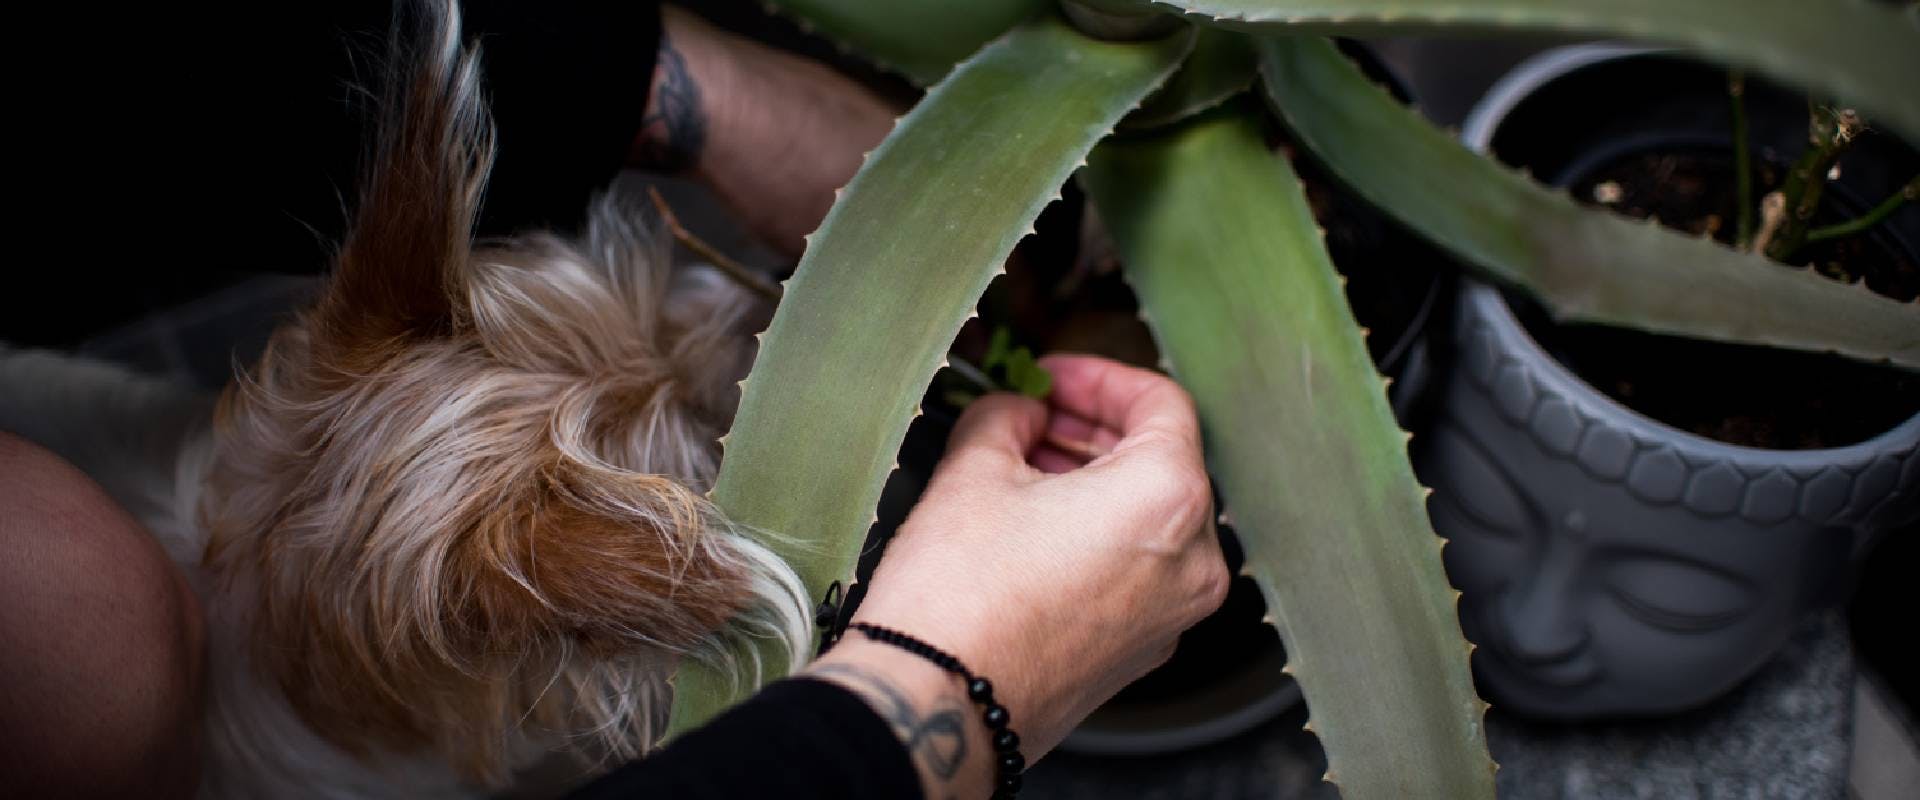 Dog sniffing at an aloe vera plant